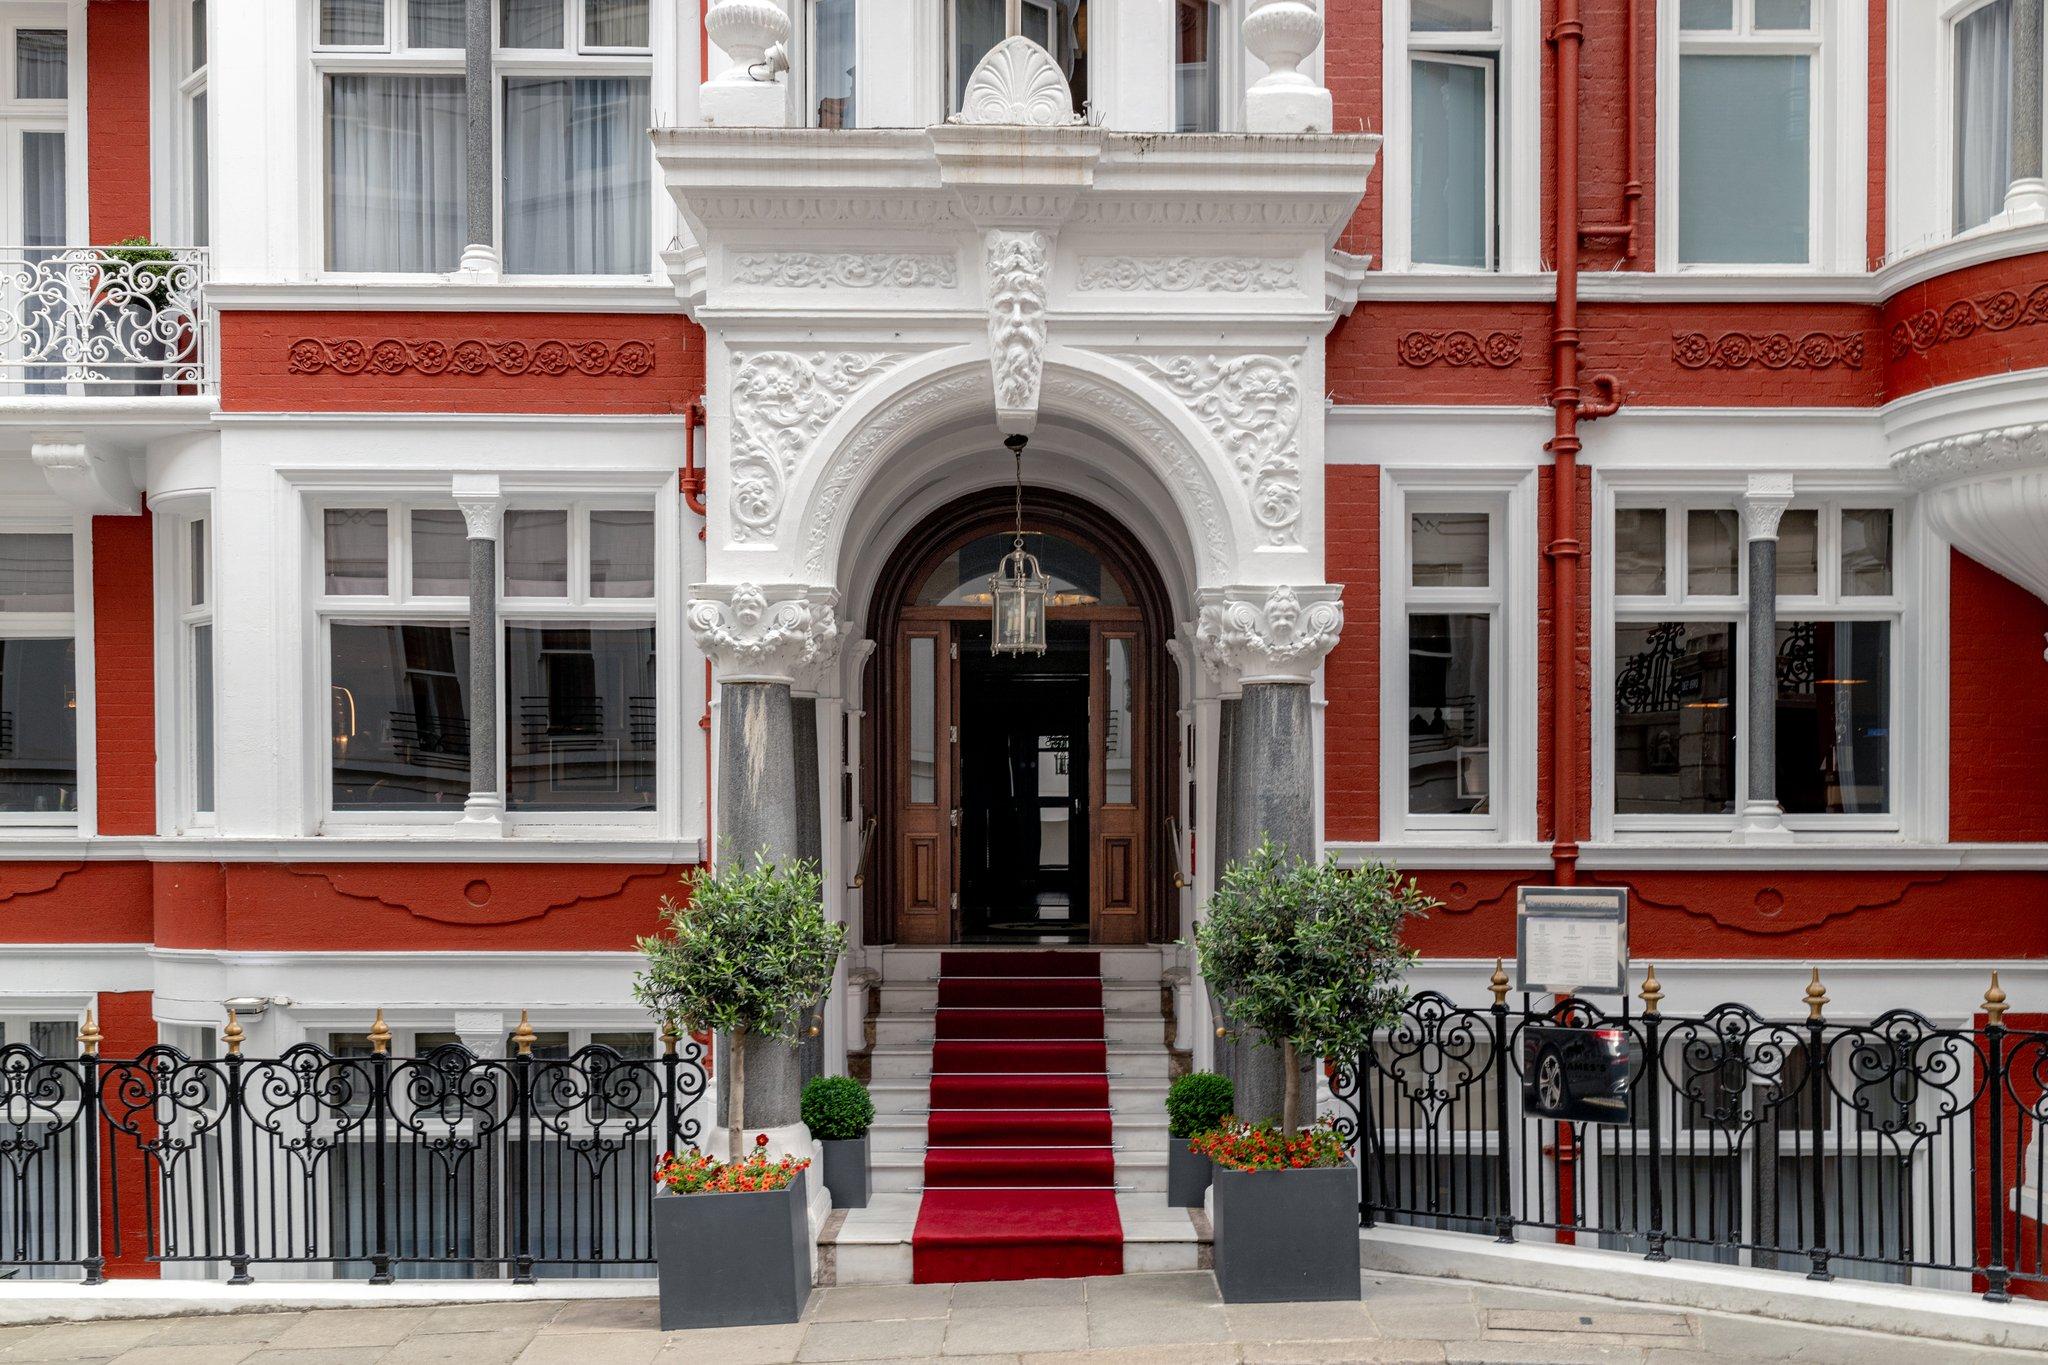 St. James's Hotel & Club in London, GB1